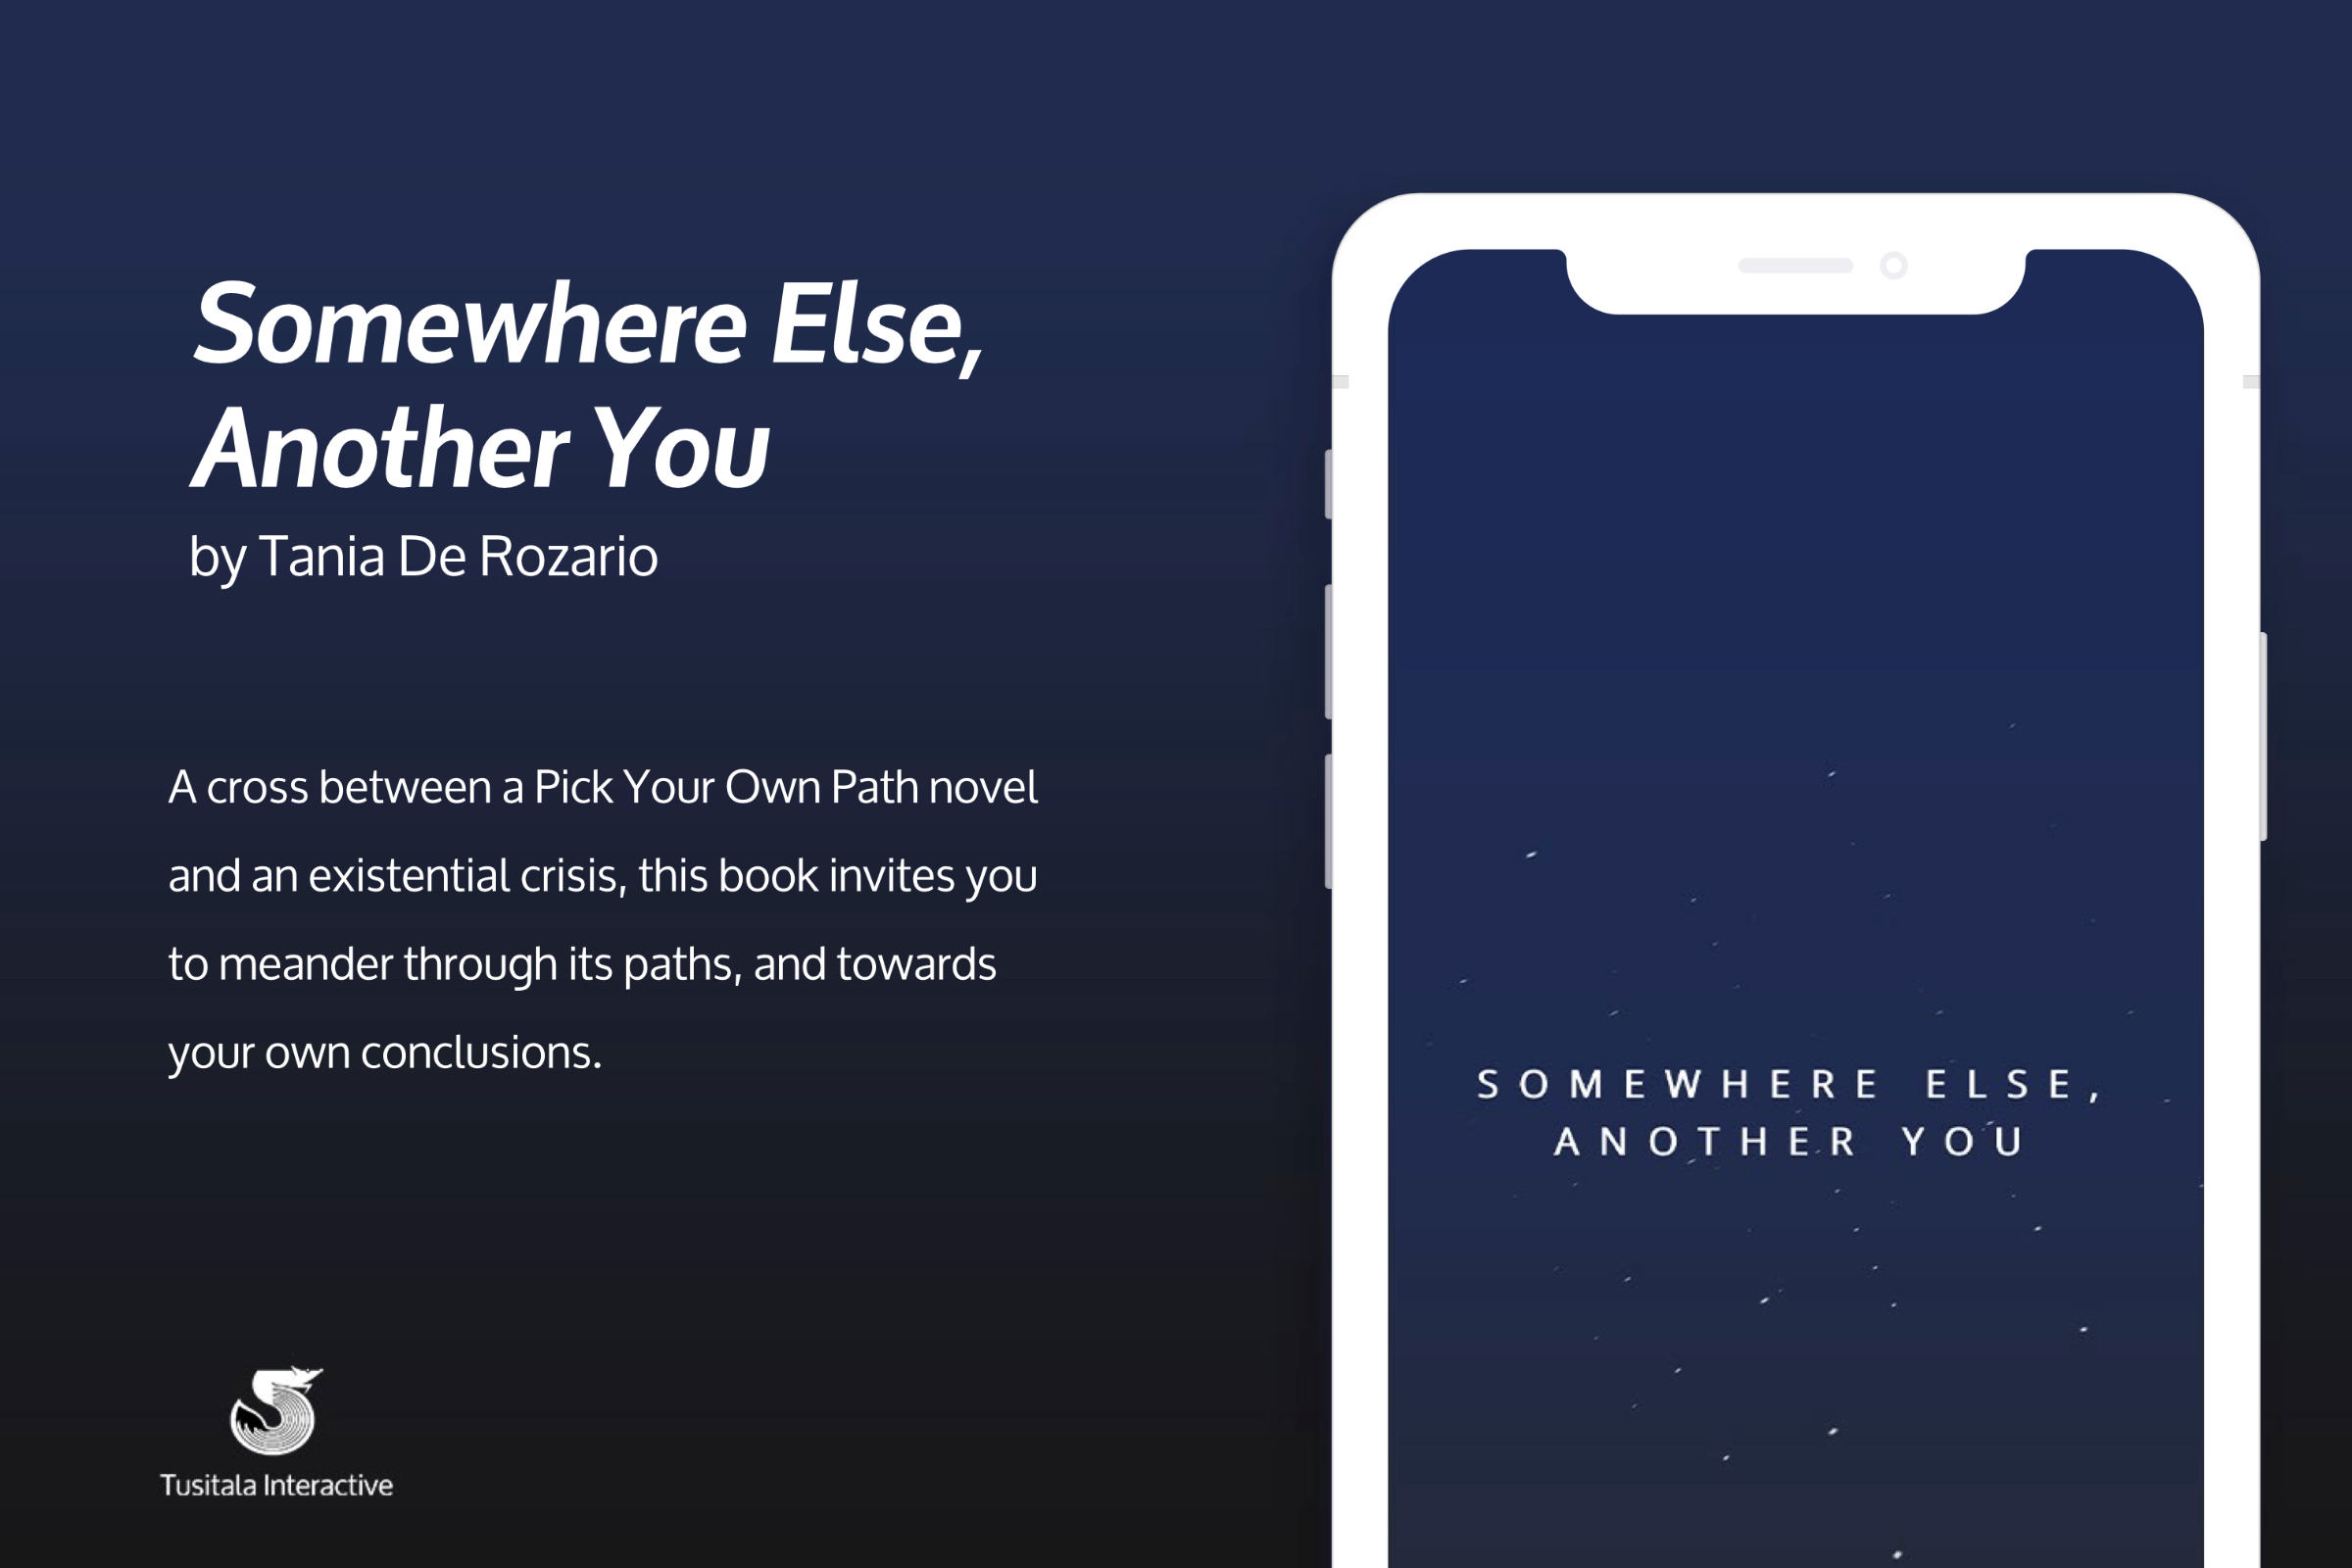 Tusitala Interactive: Somewhere Else, Another You